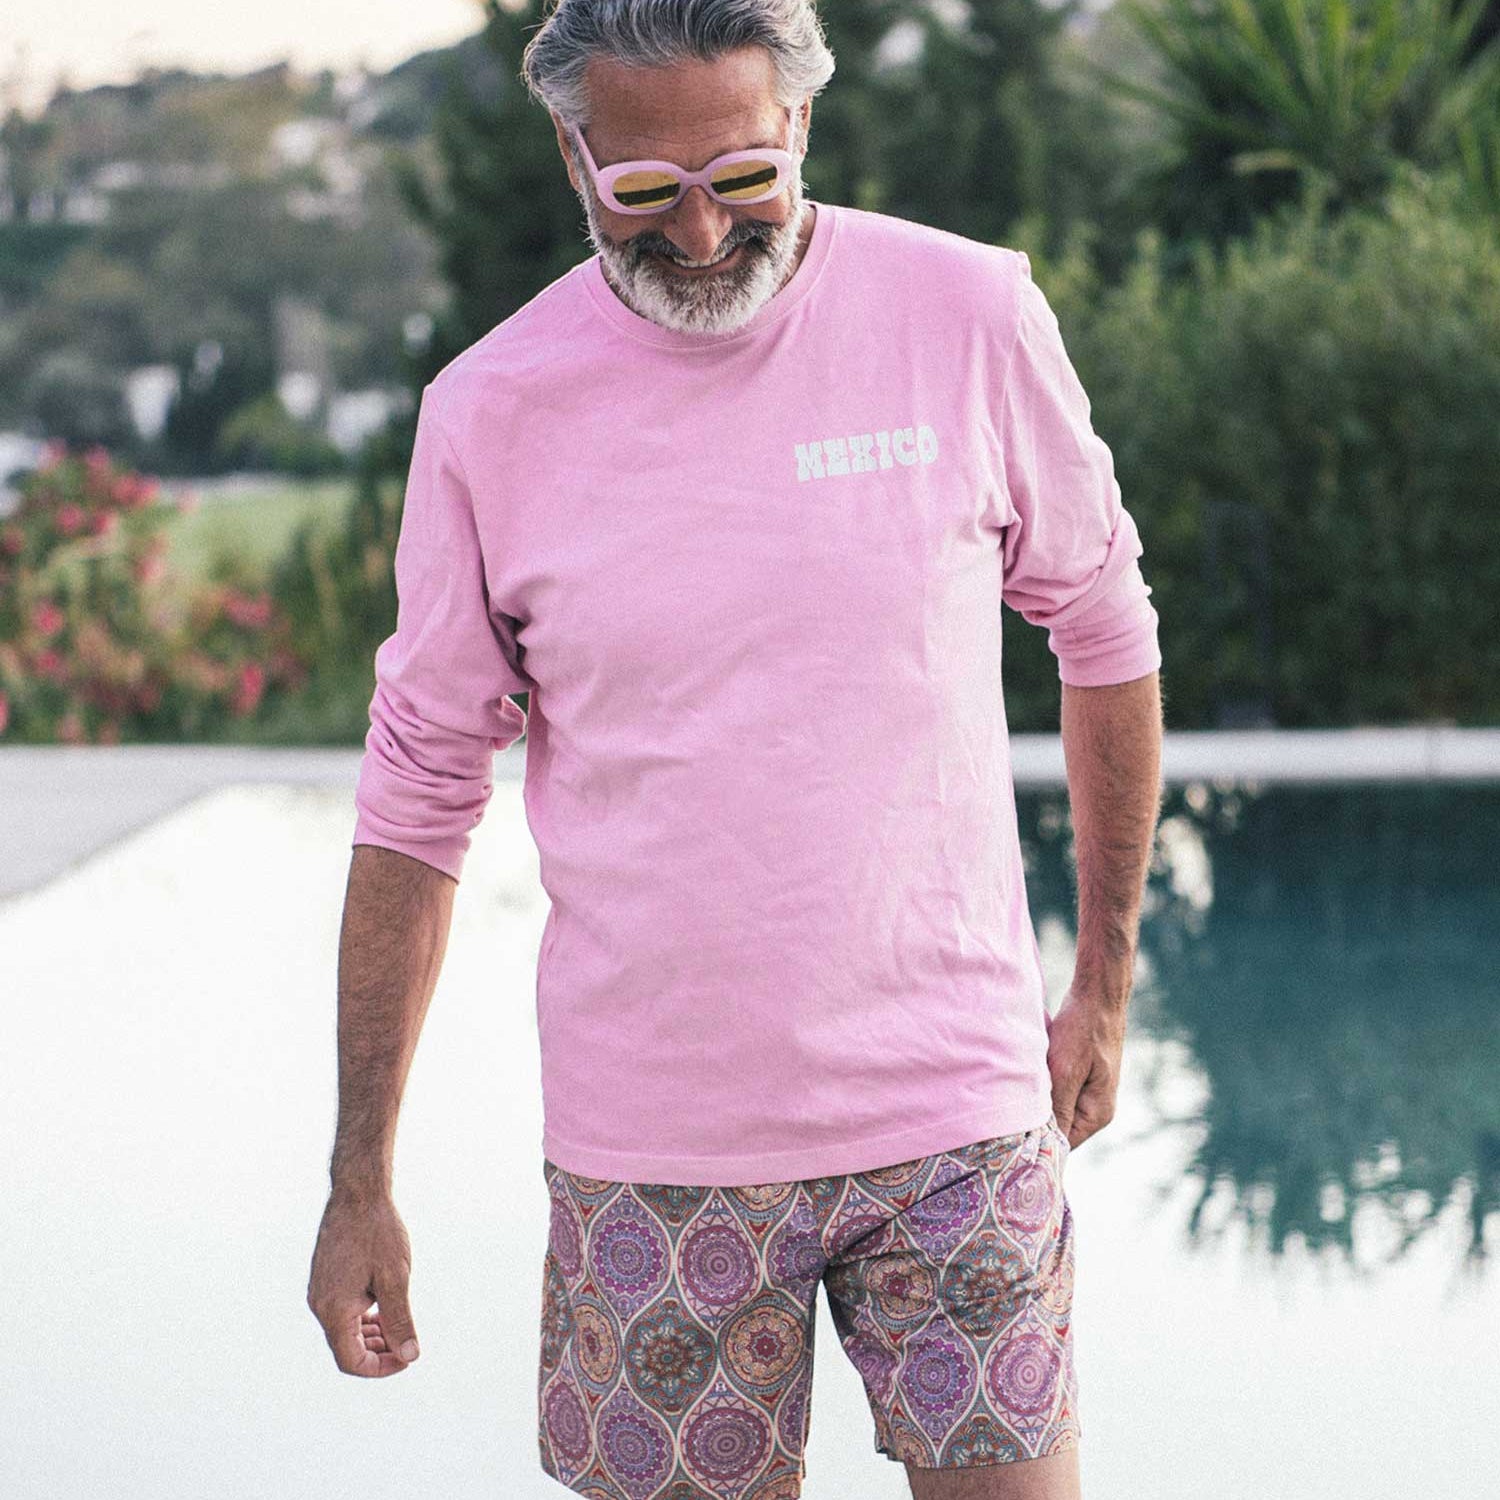 Man with pink shirt and multicolored swim trunks